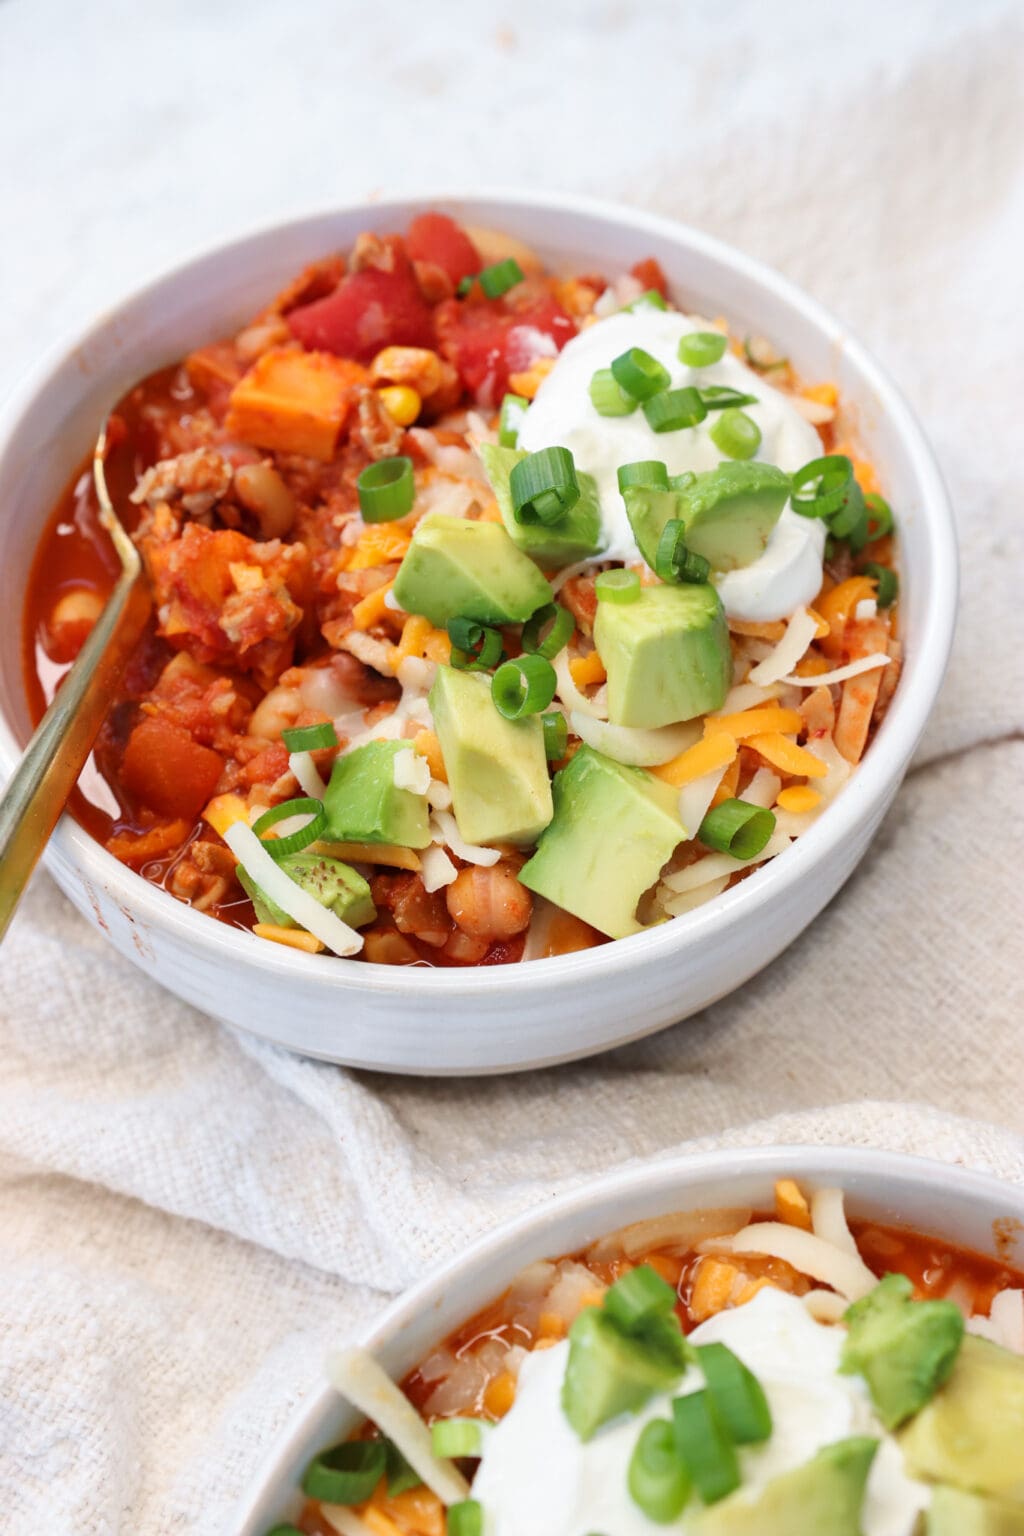 Slow Cooker Sweet Potato & Turkey Chili in two white bowls on a white table cloth